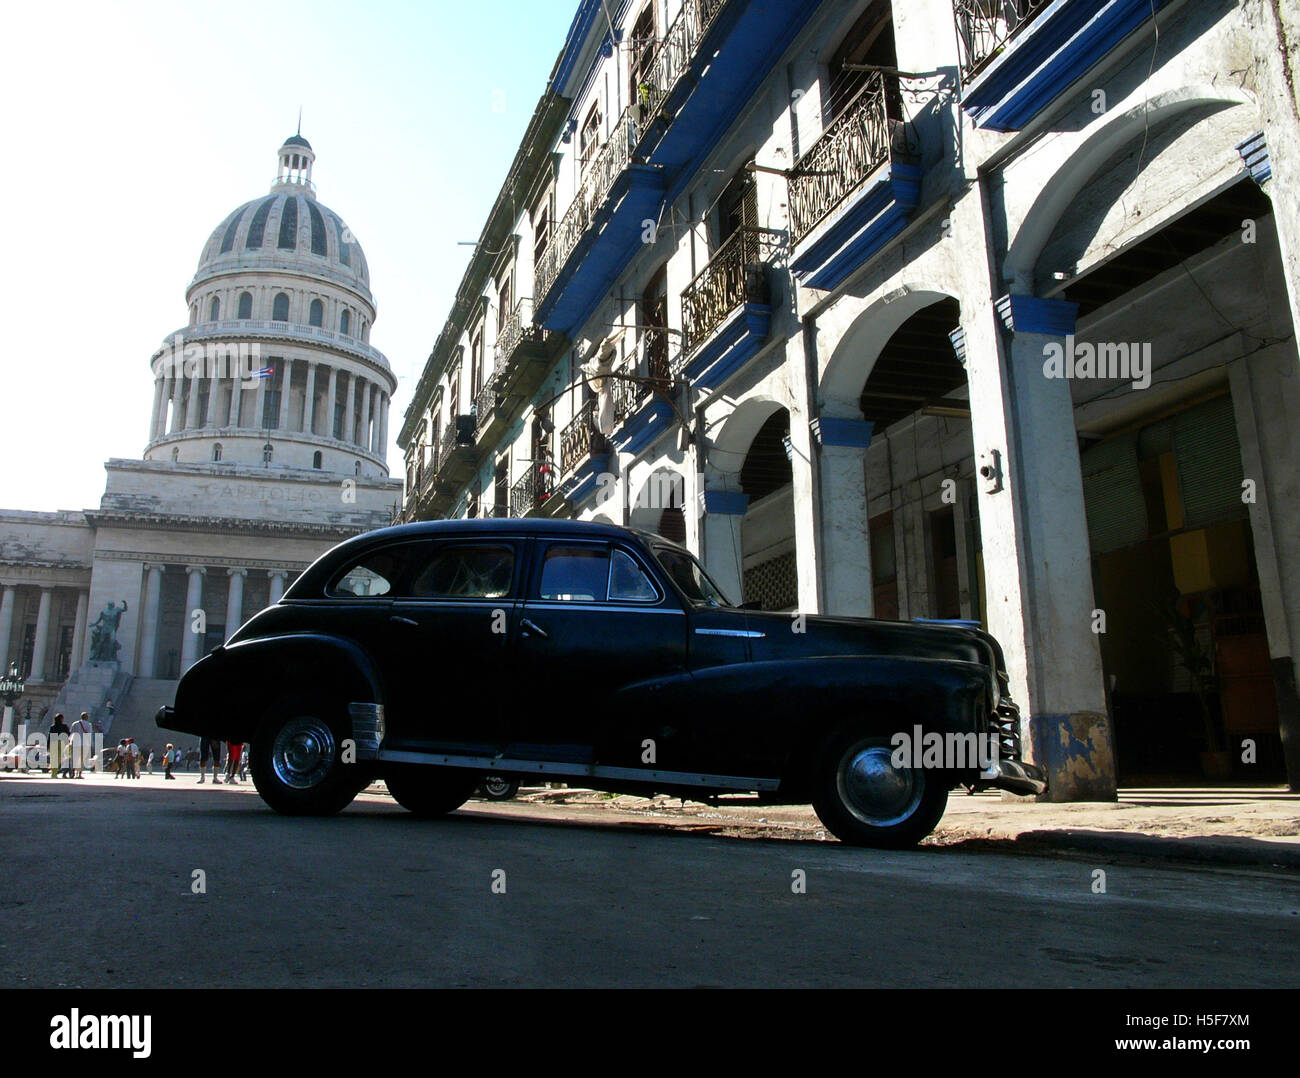 Feb 15, 2006; Havana, CUBA; One of many Cuban Maquinas, aka Yank tanks or pre 1960 American Classic cars in the streets of Havana with Capitolio Nacional (National Capitol building). One in eight cars in Cuba today is a pre-1960s American brand Ford, Chevrolet, Cadillac, Chrysler, Packard and other classic models. The Republic of Cuba is located in the northern Caribbean and south of the United States. The first European to visit Cuba was explorer Christopher Columbus in 1492. Centuries of colonial rule and revolutions followed. Batista was deposed by Fidel Castro and Che guevara in 1953. Afte Stock Photo